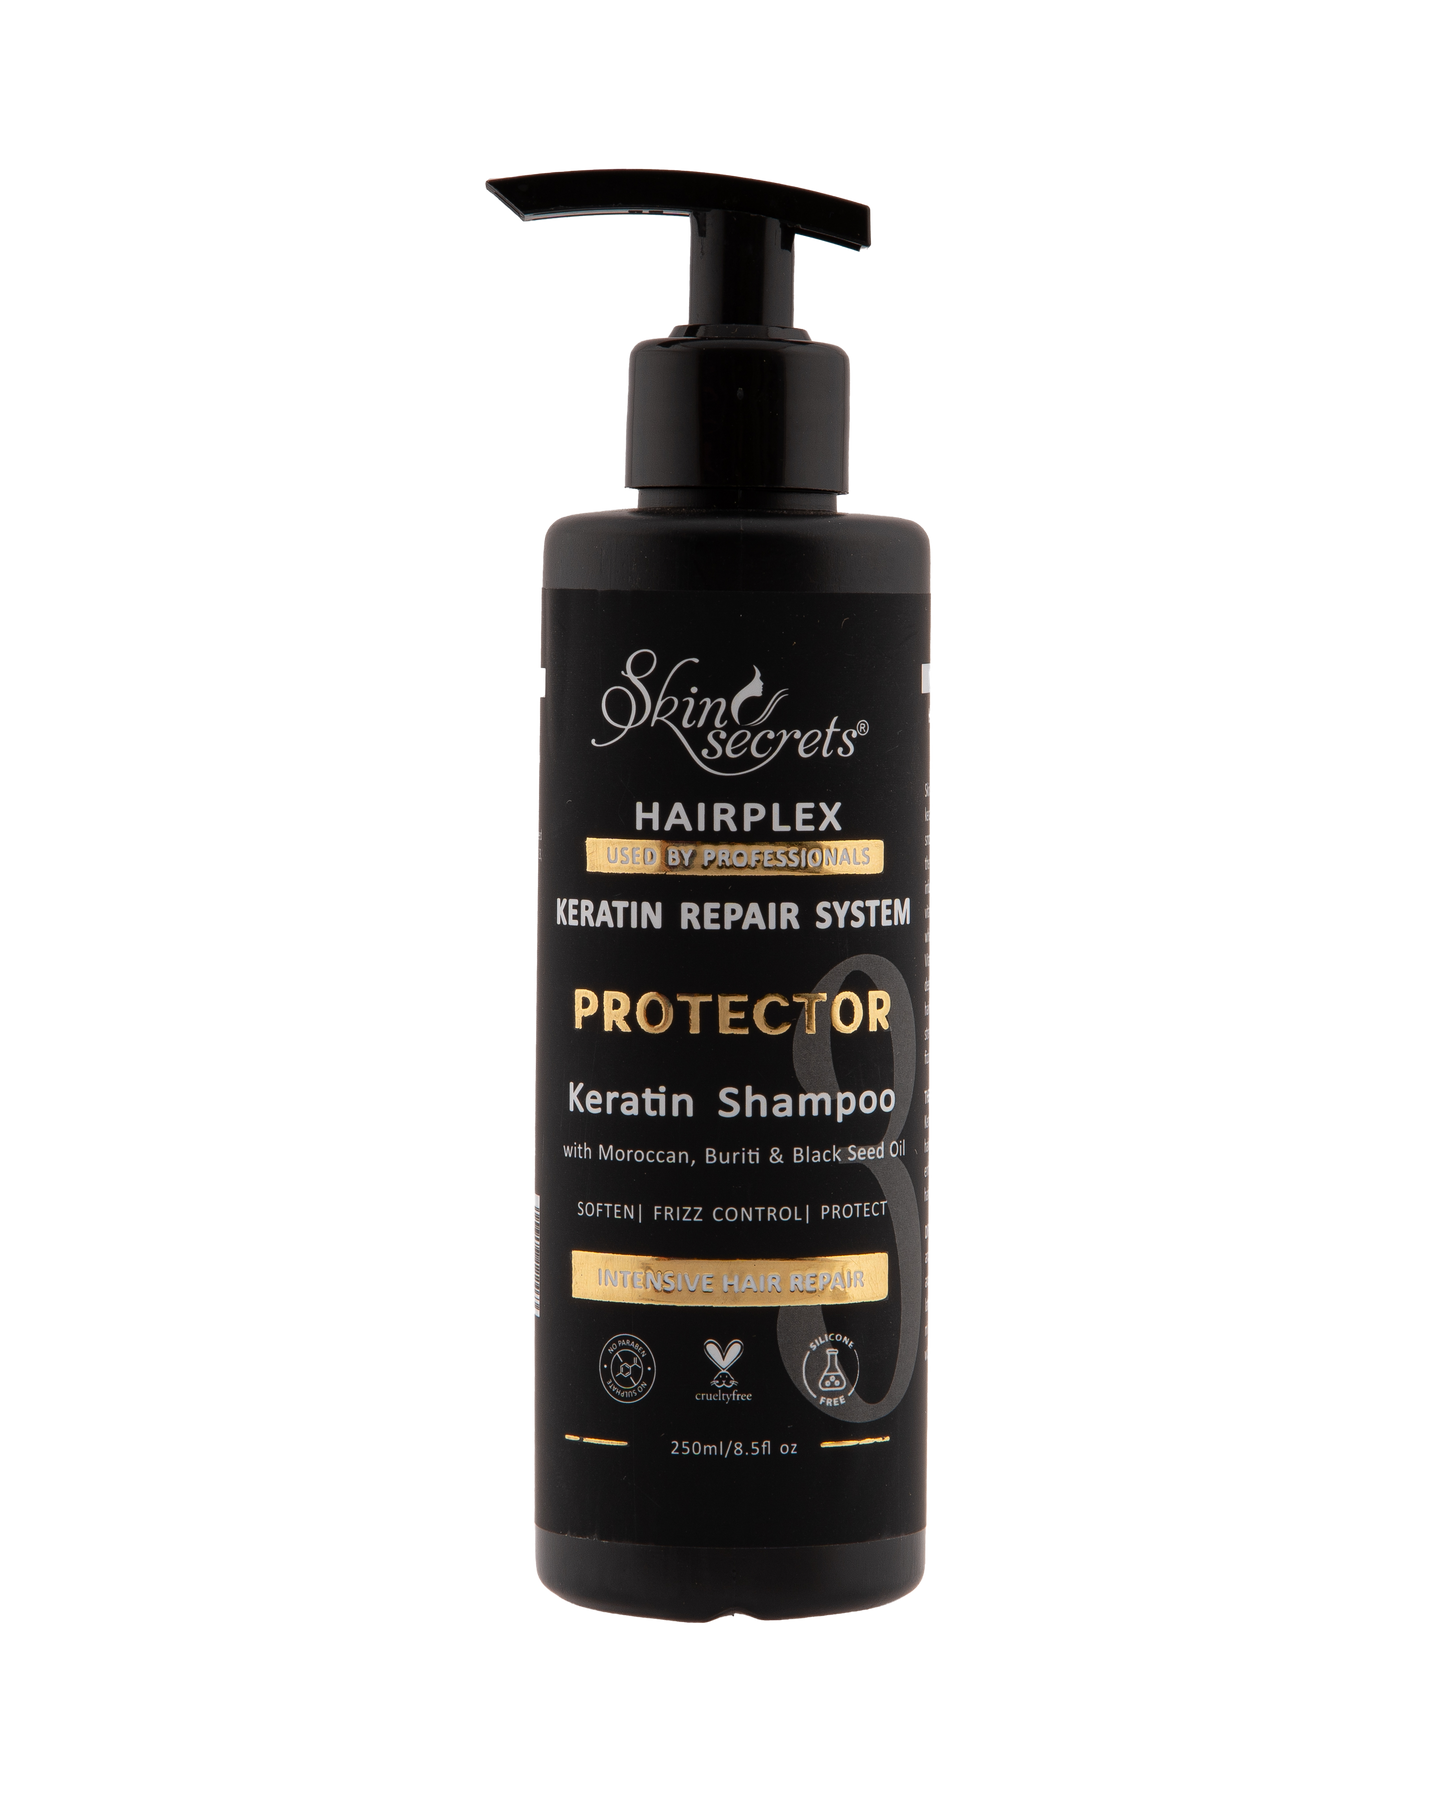 Skin Secrets Protector Ultra Nourishing Post Keratin Shampoo with with Moroccan, Buriti & Black Seed Oil (Step 3)| Paraben & Sulphate free (250ml)